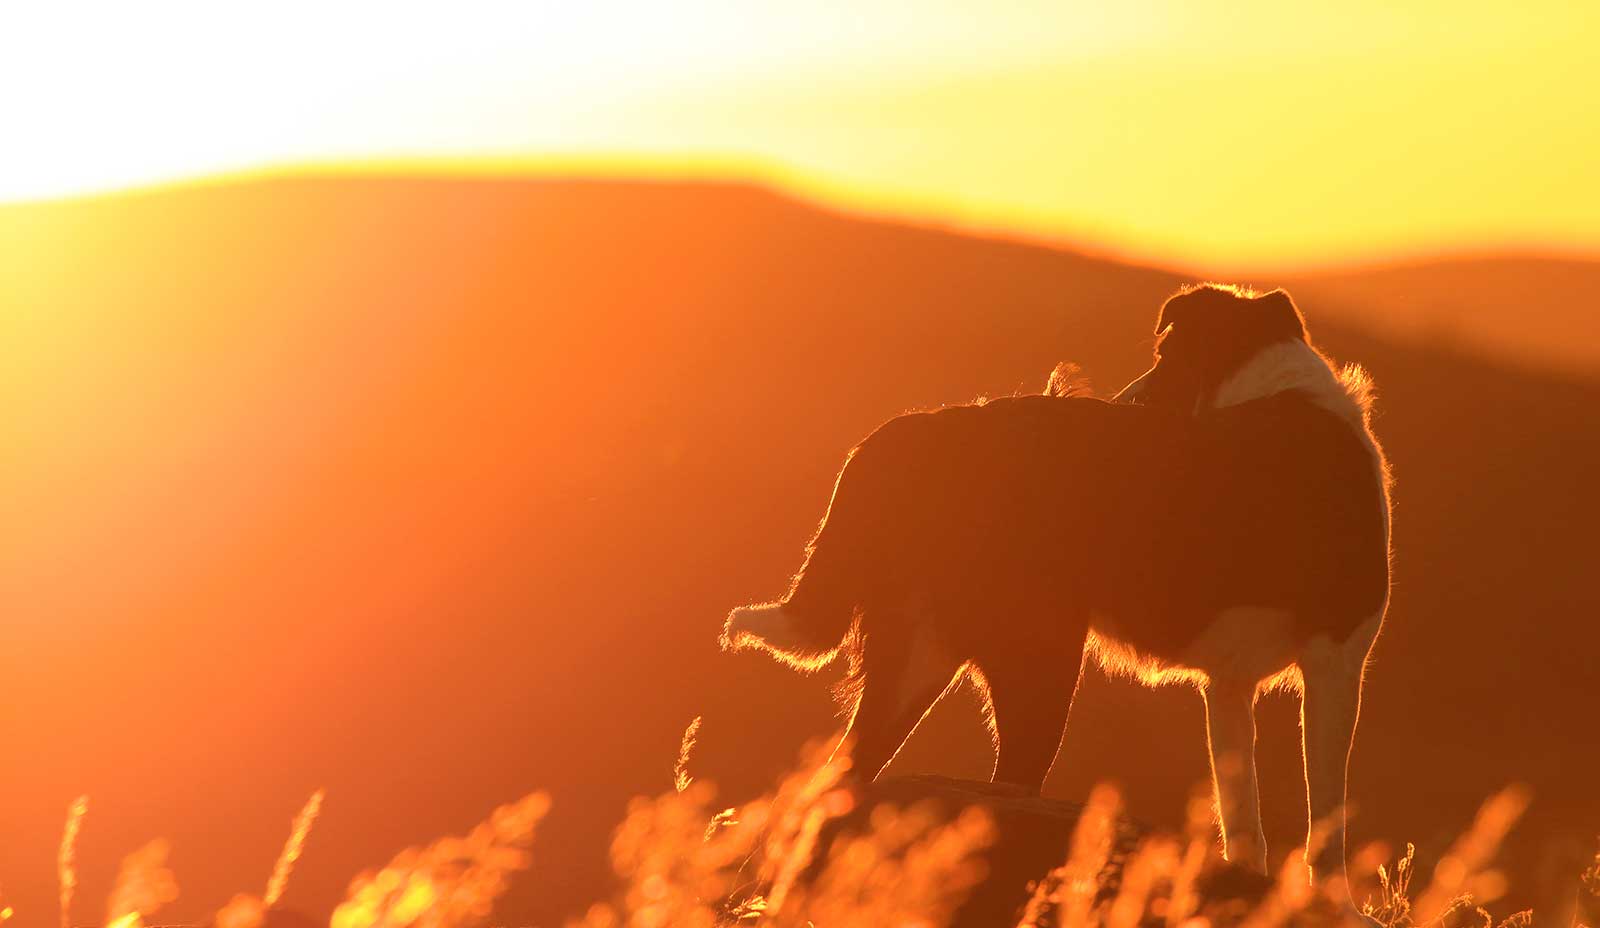 A dog standing in a sunset